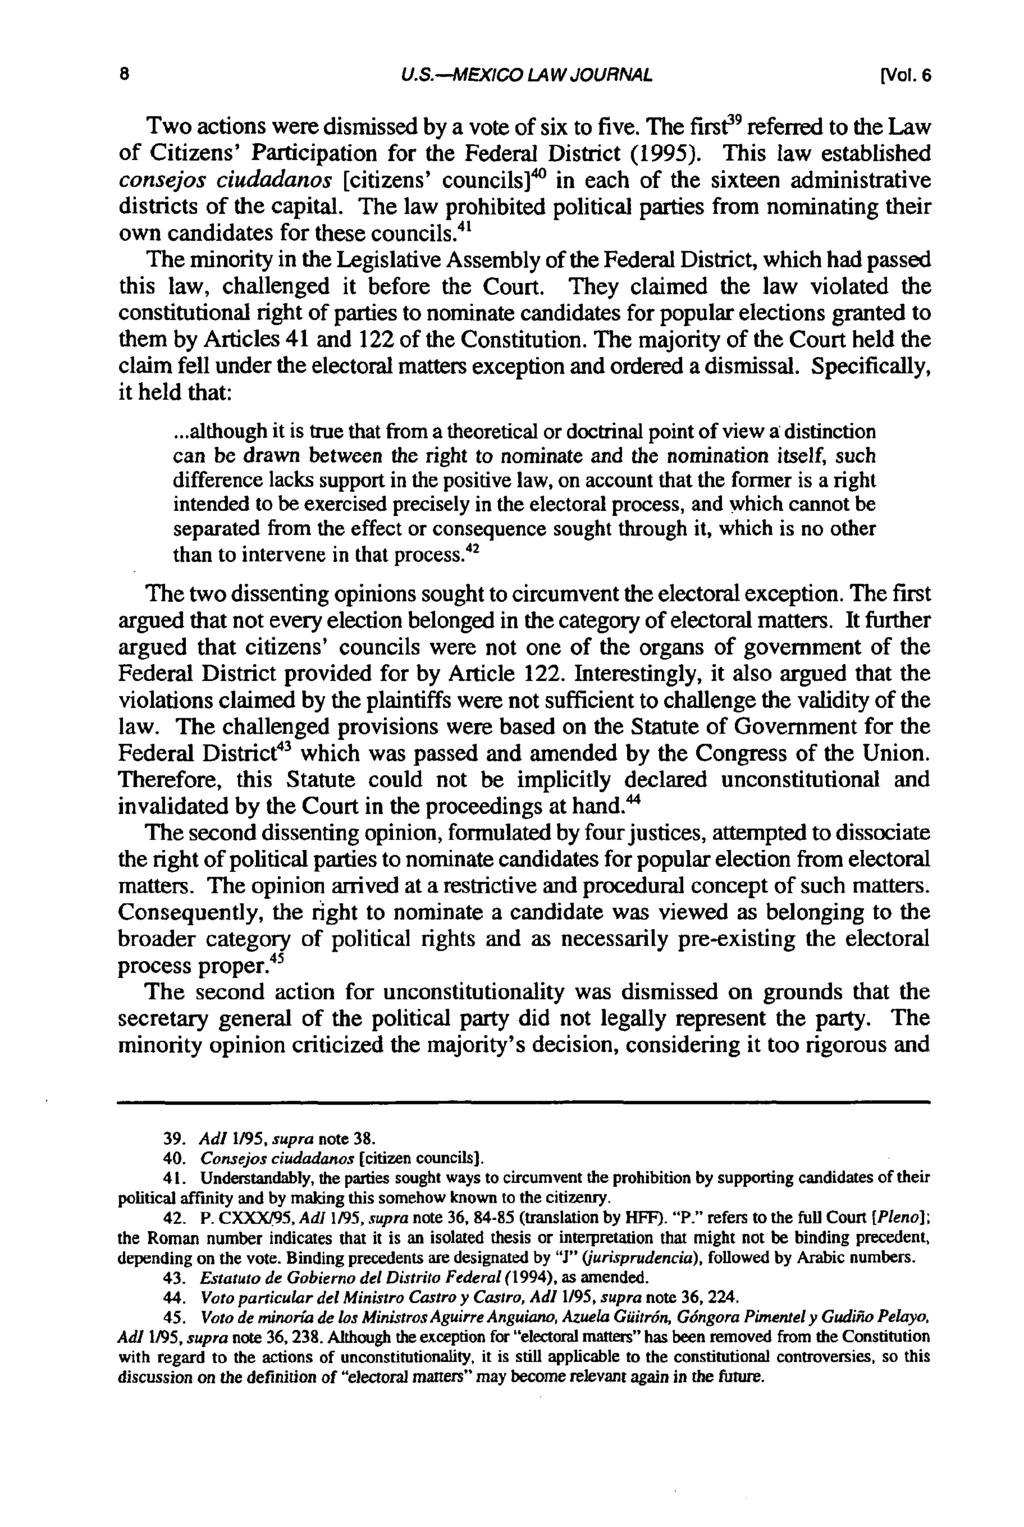 U.S.-MEXICO LAW JOURNAL [Vol. 6 Two actions were dismissed by a vote of six to five. The first 39 referred to the Law of Citizens' Participation for the Federal District (1995).